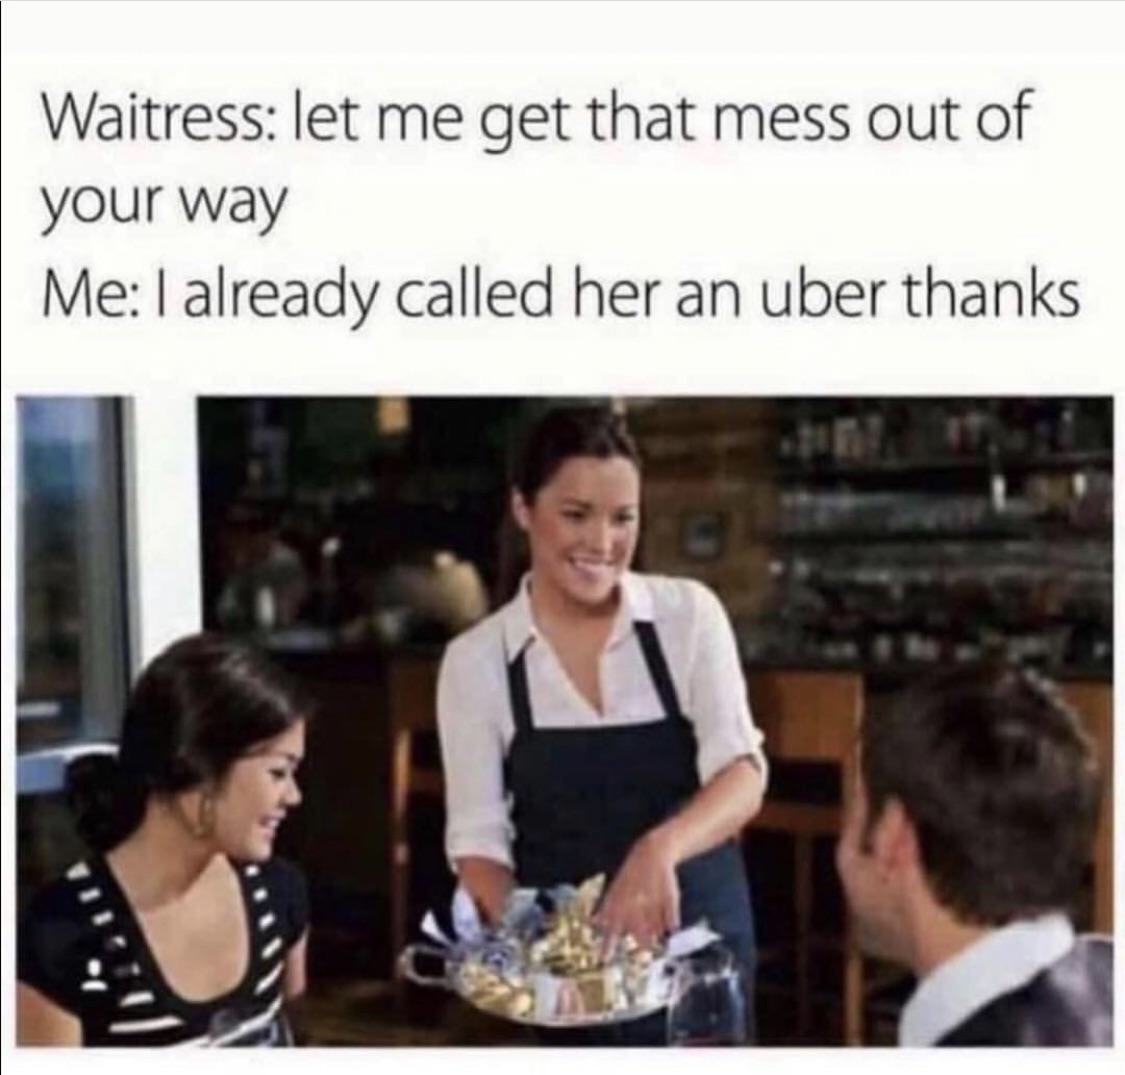 let me get this mess out of your way meme - Waitress let me get that mess out of your way Me I already called her an uber thanks